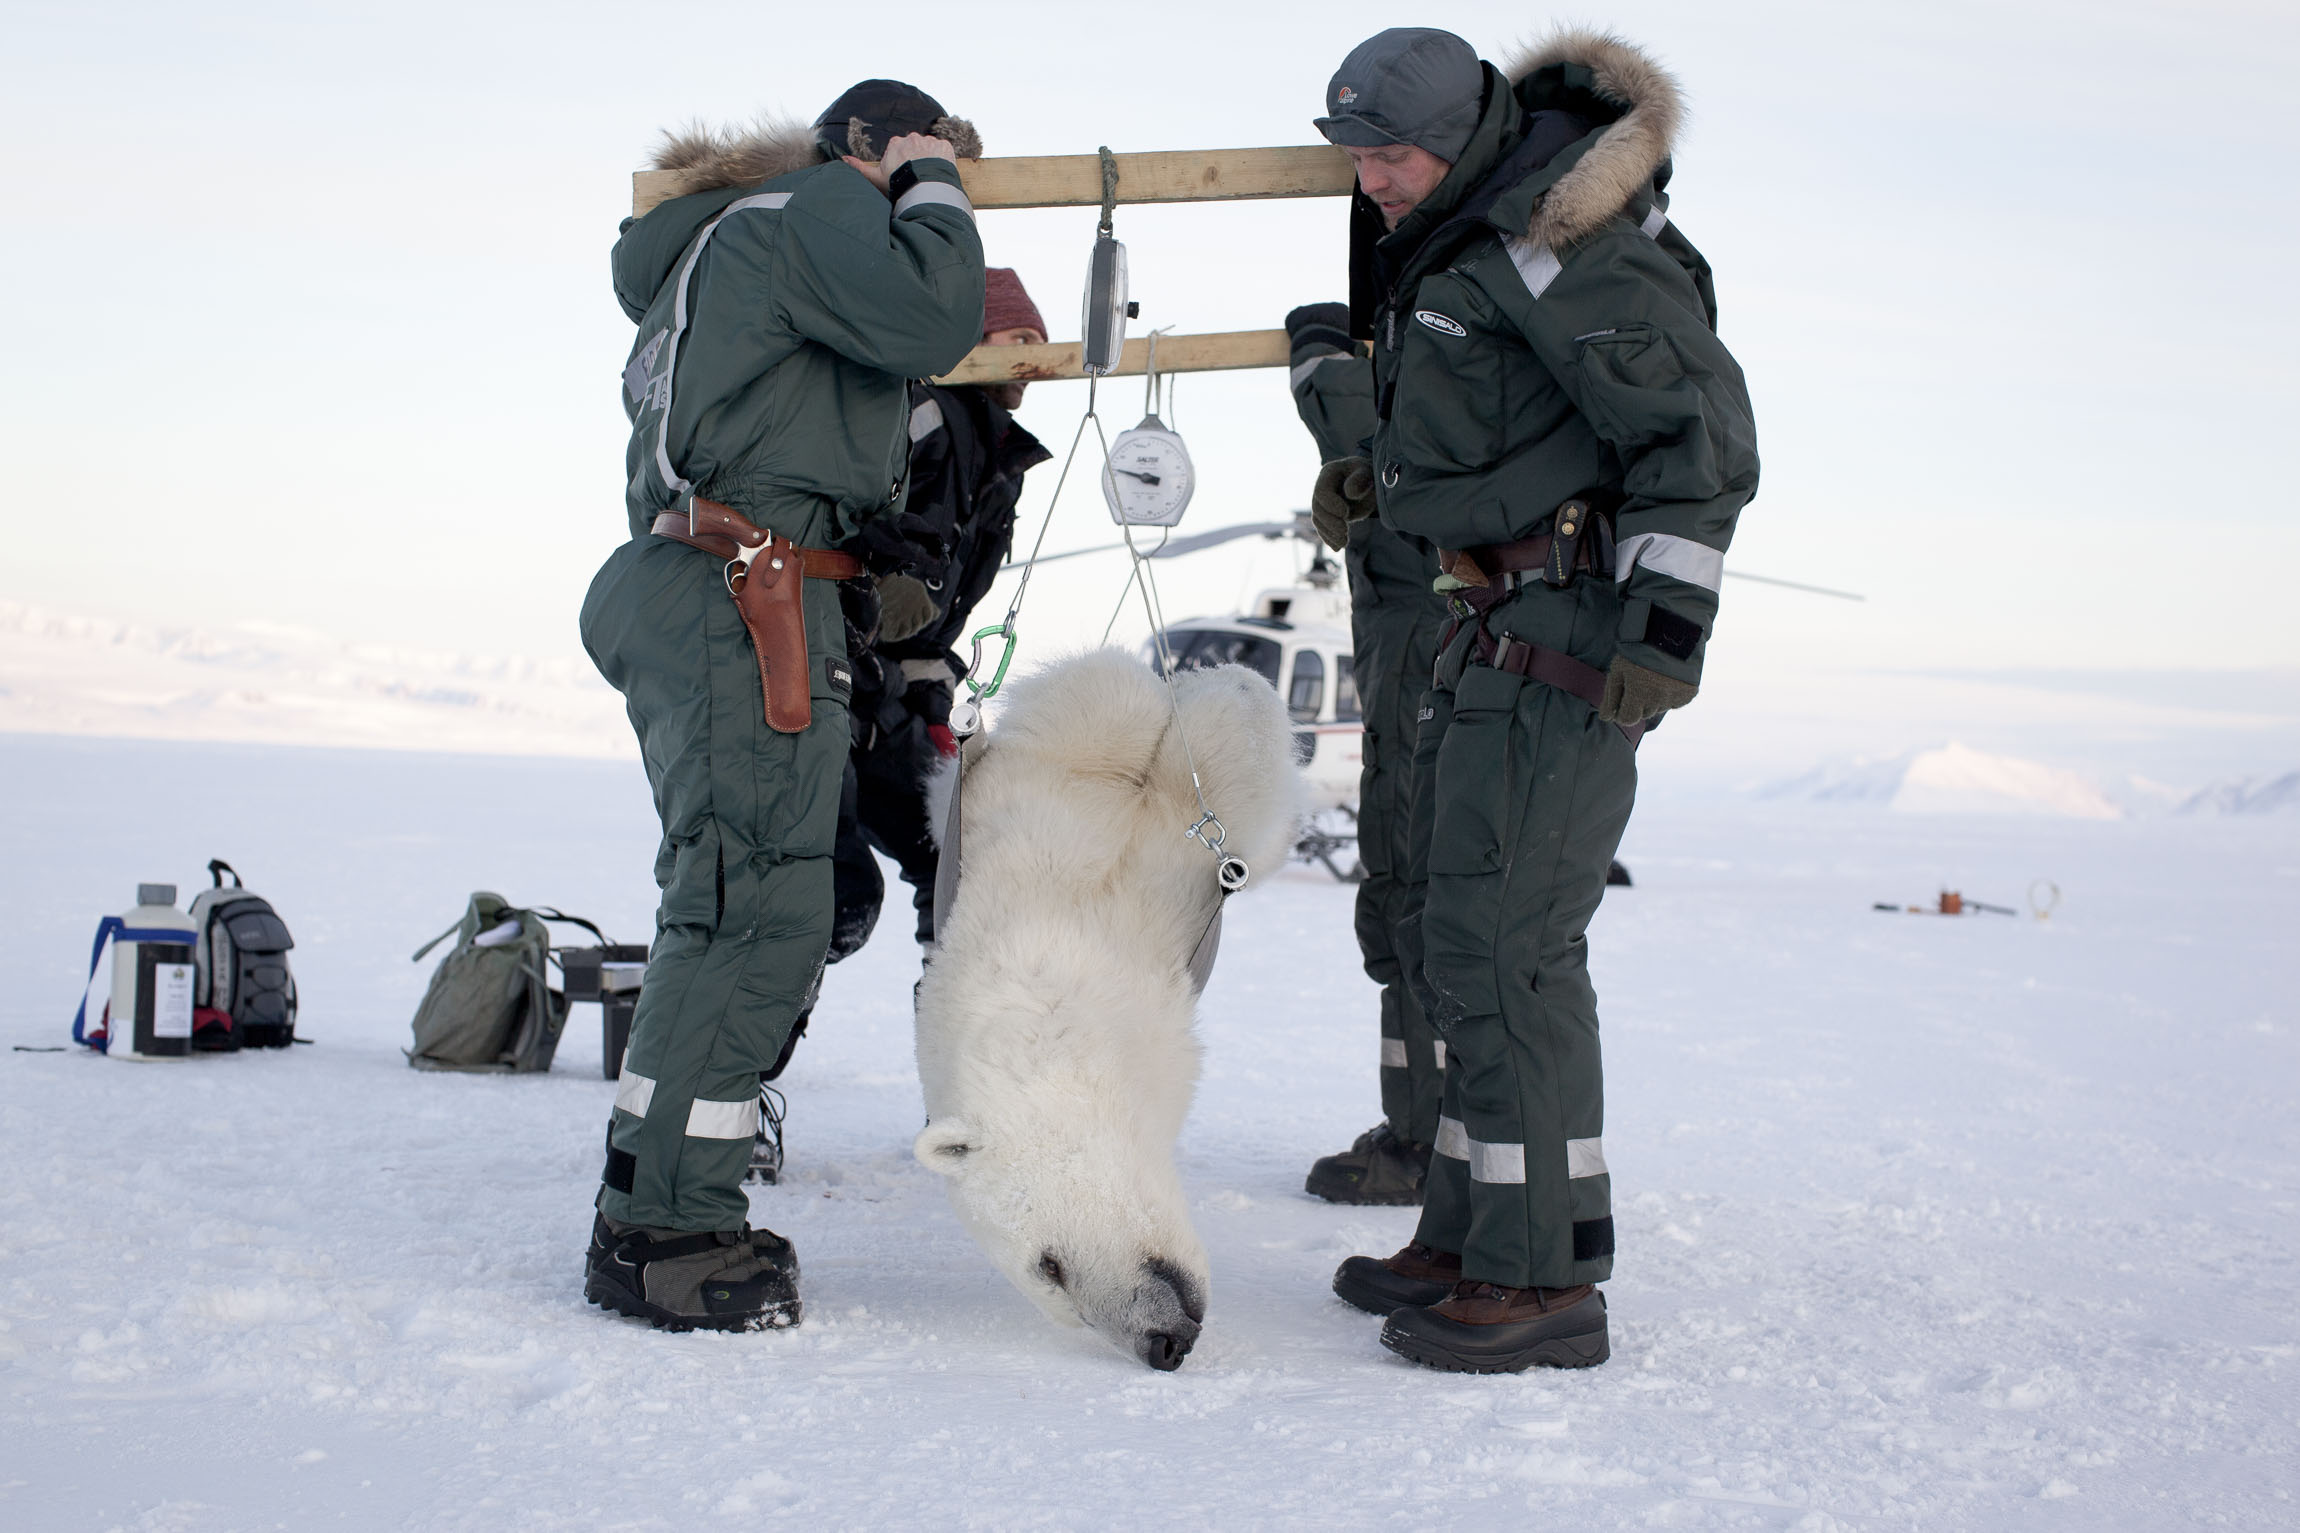 A tranquilised polar bear is weighed for scientific research